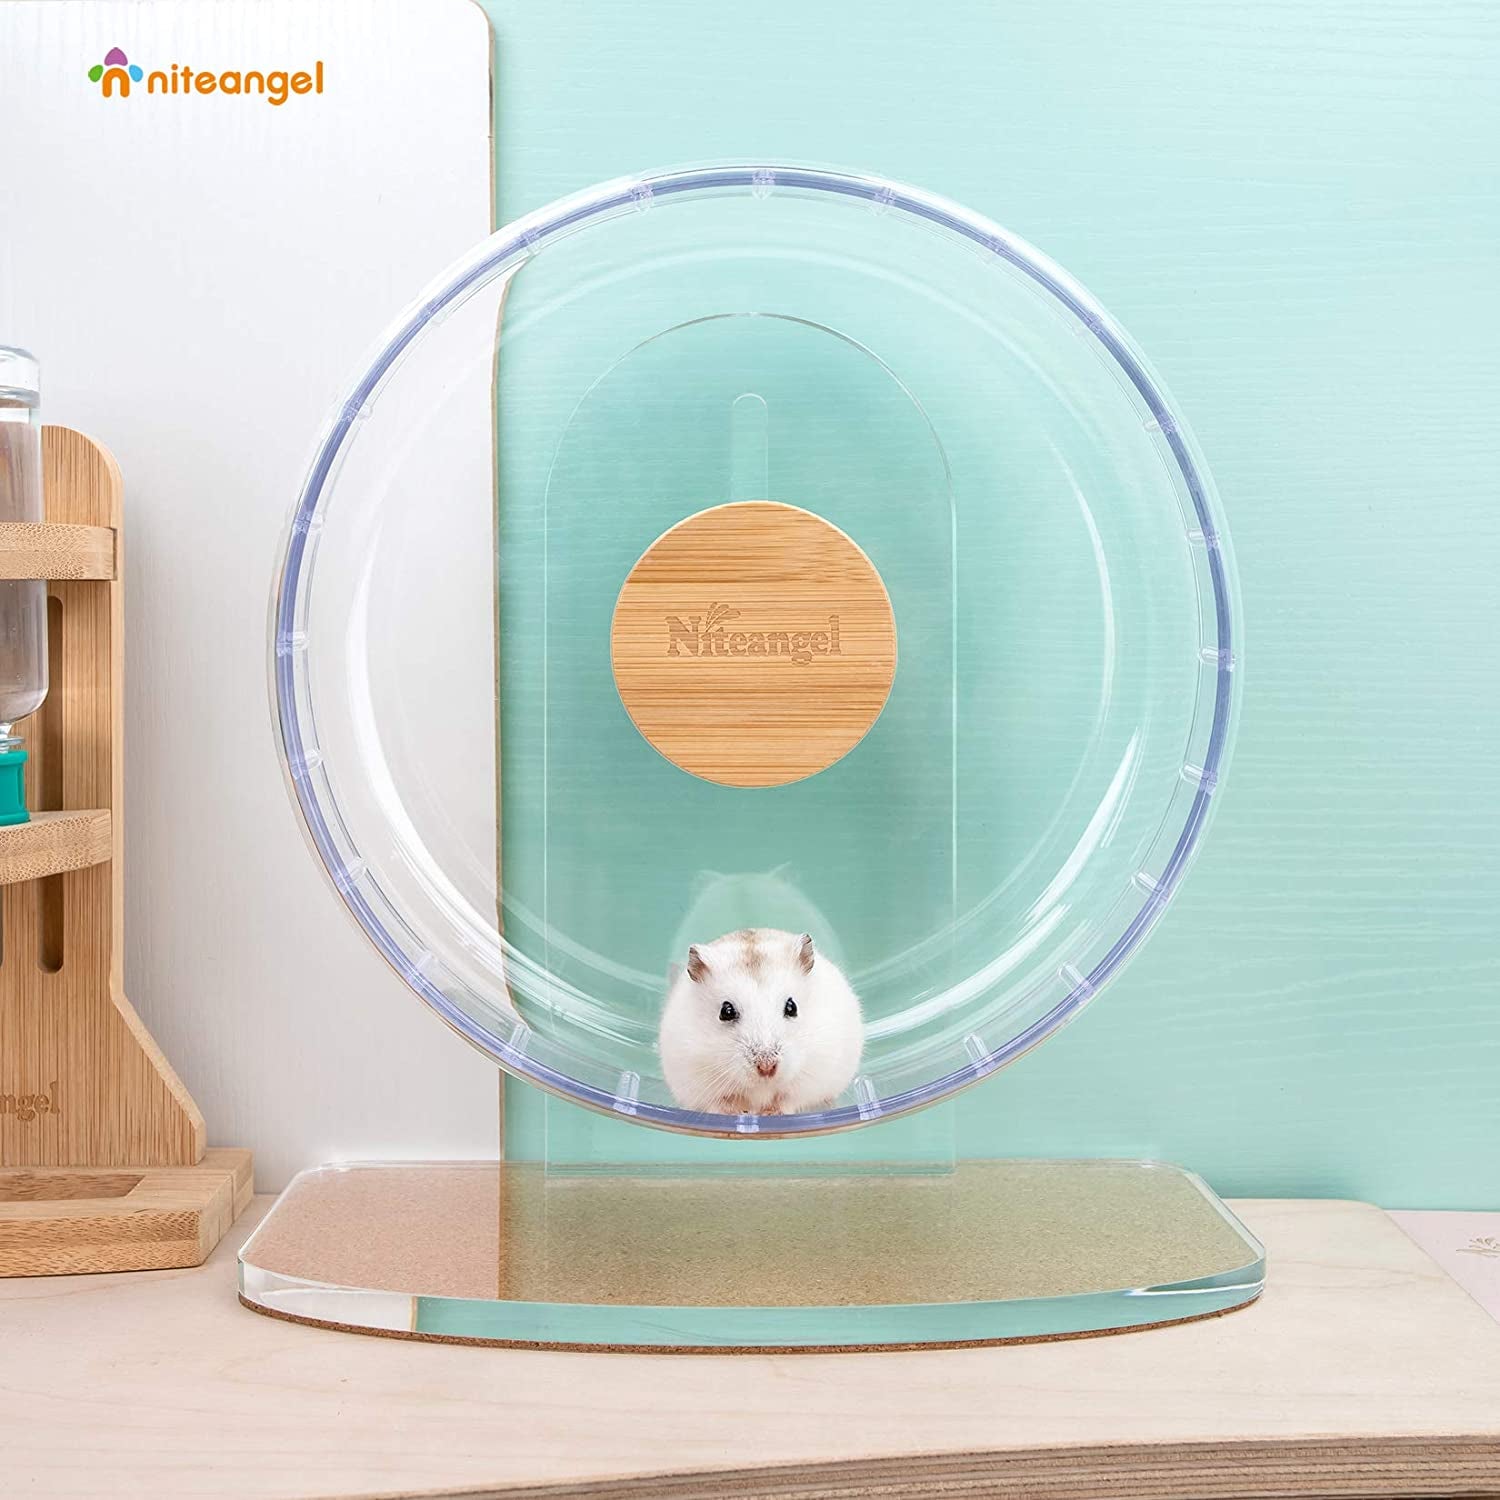 Super-Silent Hamster Exercise Wheels: - Quiet Spinner Hamster Running Wheels with Adjustable Stand for Hamsters Gerbils Mice or Other Small Animals (S, Transparent)